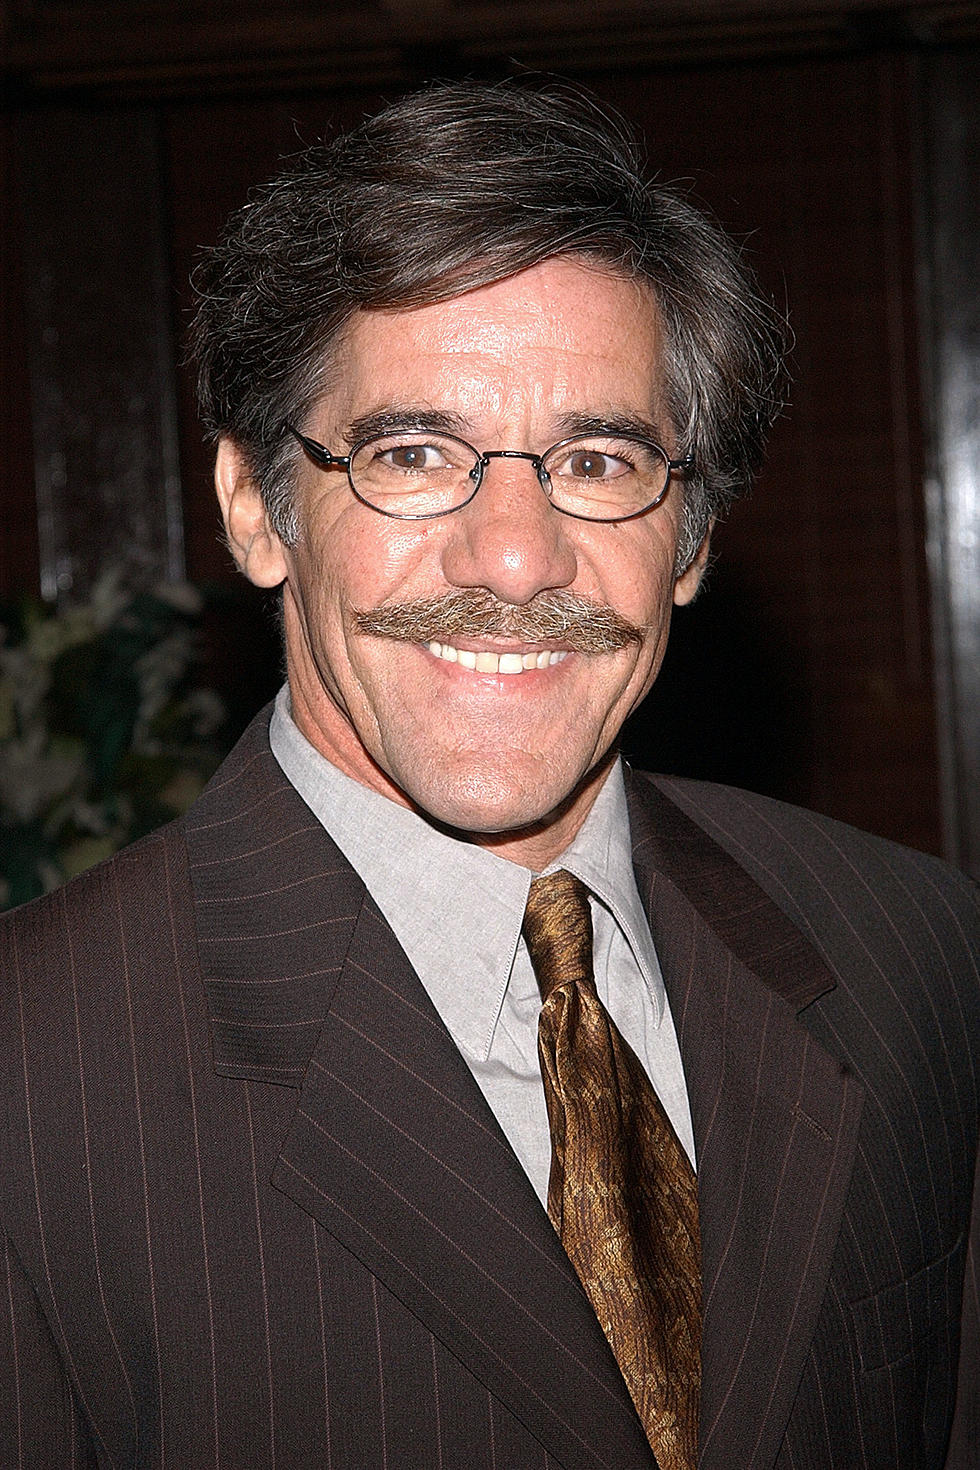 Deleted from His Twitter Account, But We Have It Here &#8211; Geraldo Rivera&#8217;s Semi Naked &#8216;Selfie&#8217;